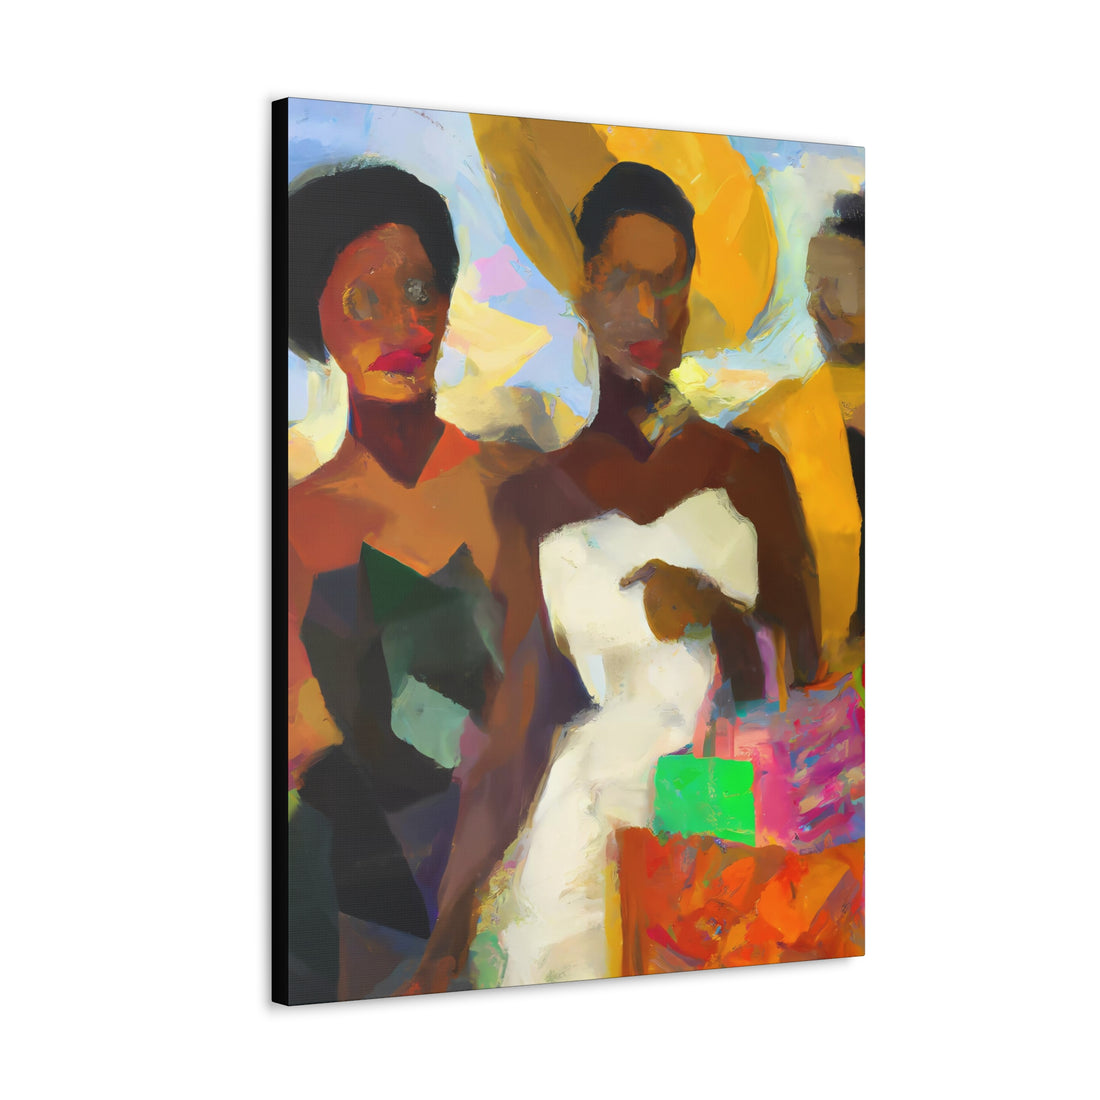 Lady in Cream, Shopping Lifestyle Series | Canvas Wall Art